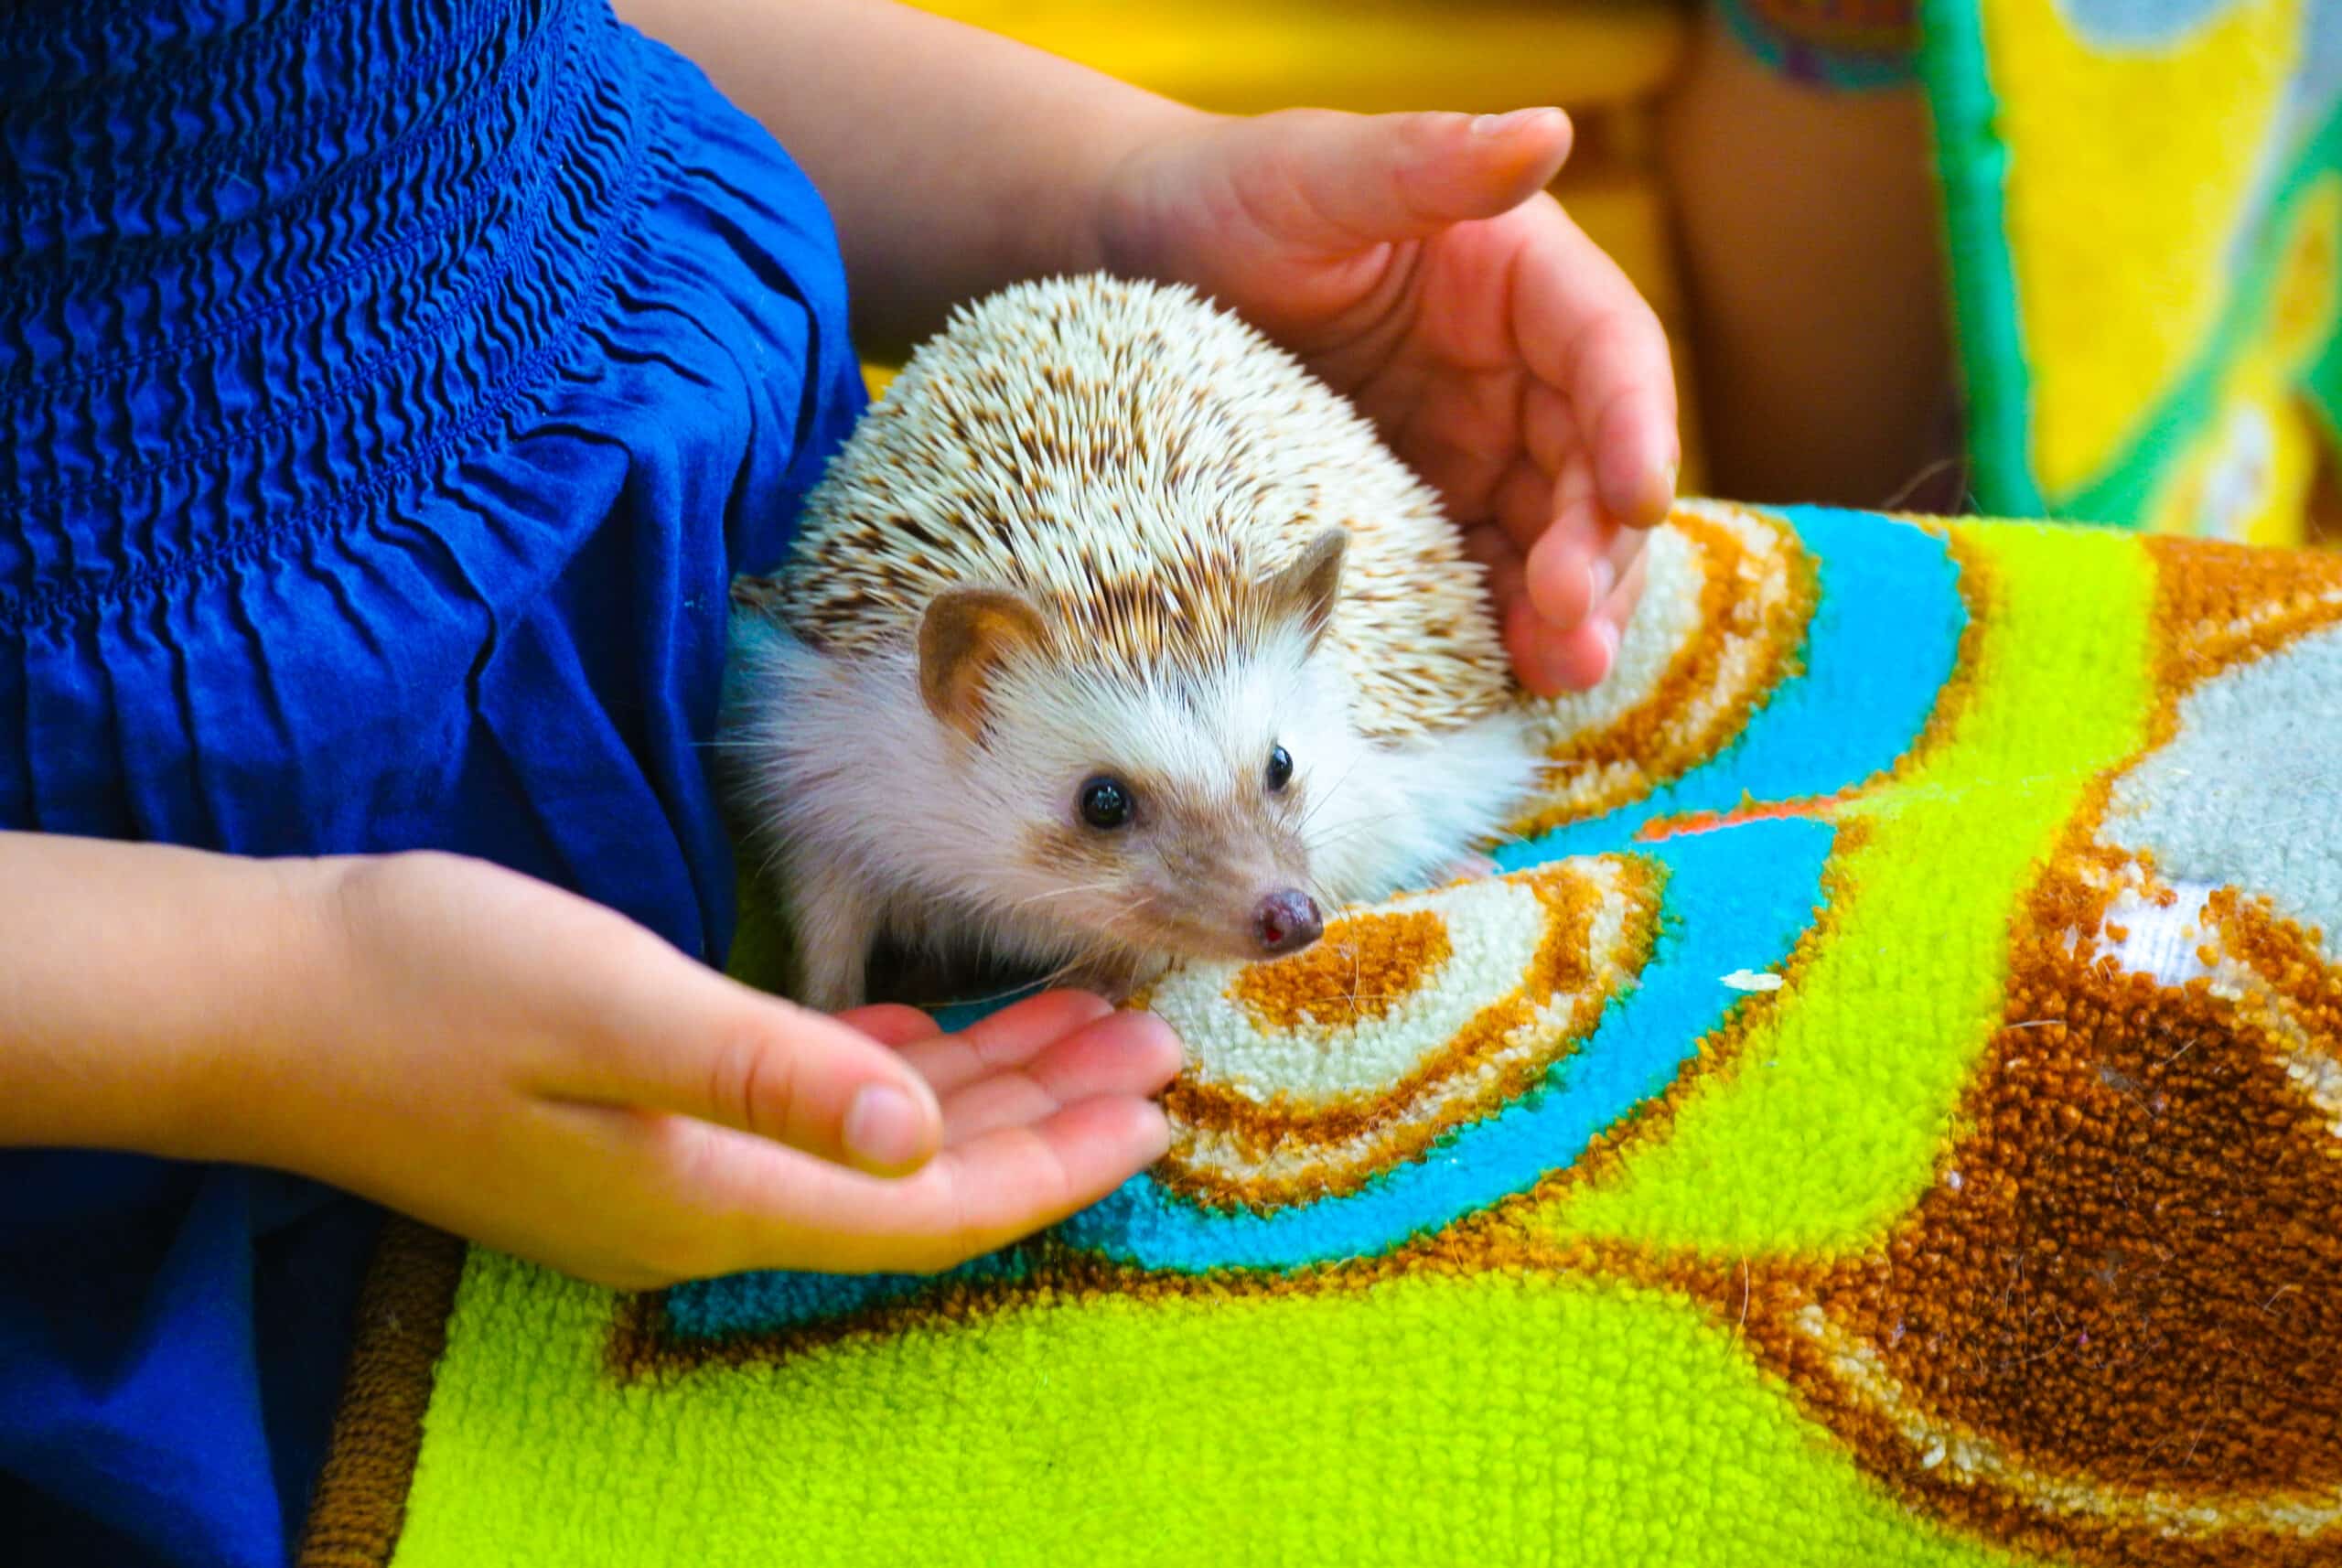 Baby Hedgehog at Tiny Tails to You Traveling Petting Zoo